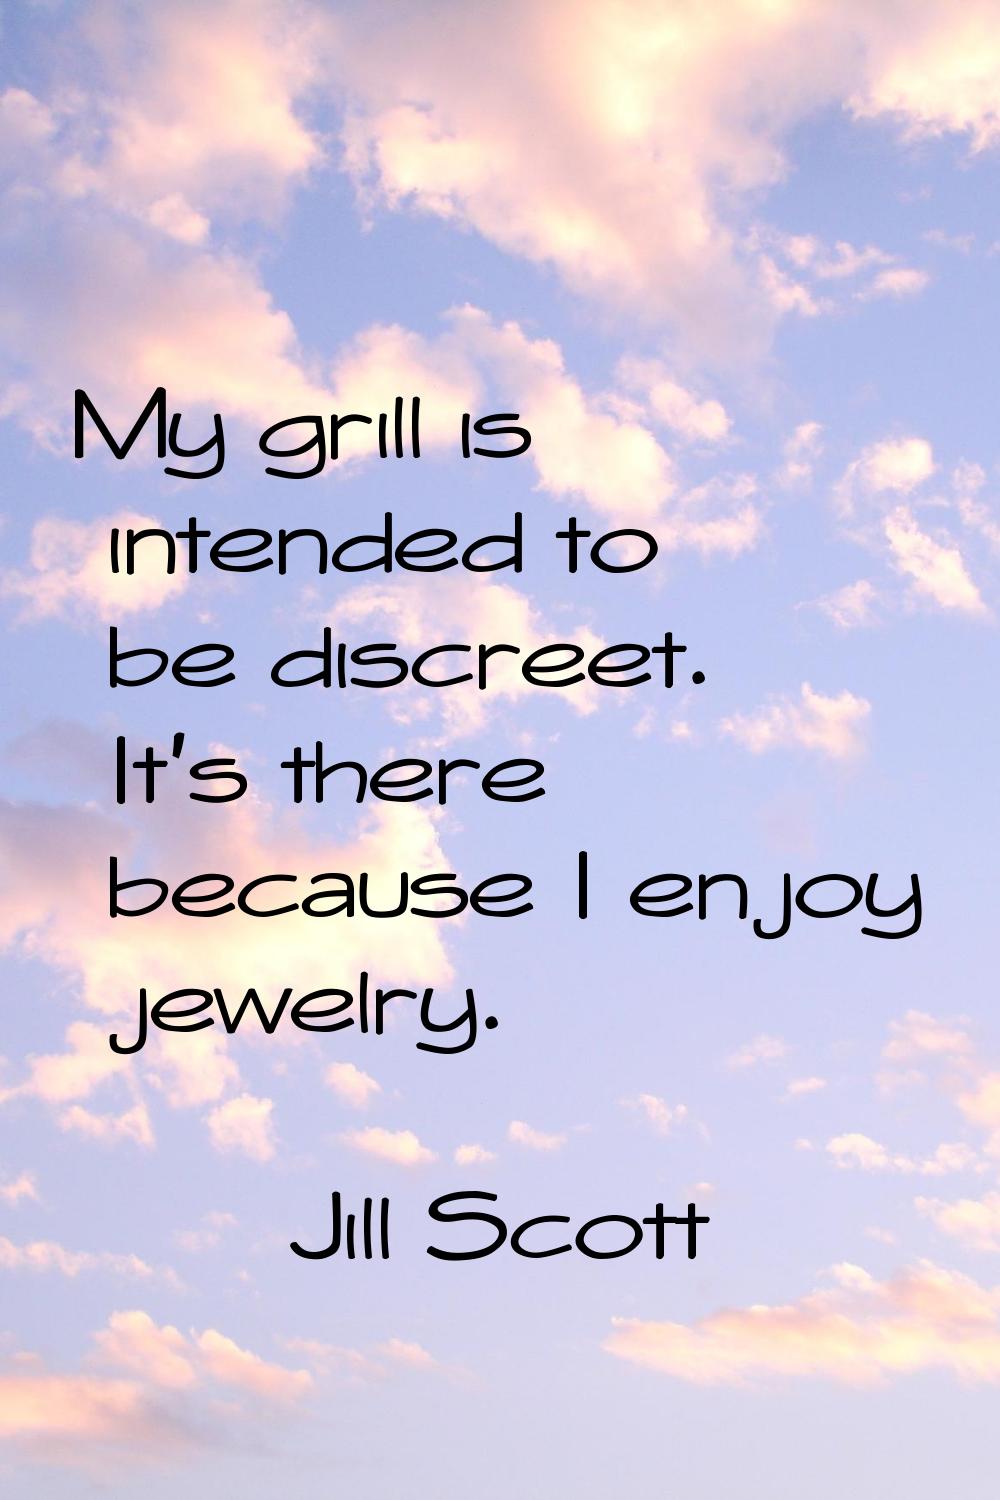 My grill is intended to be discreet. It's there because I enjoy jewelry.